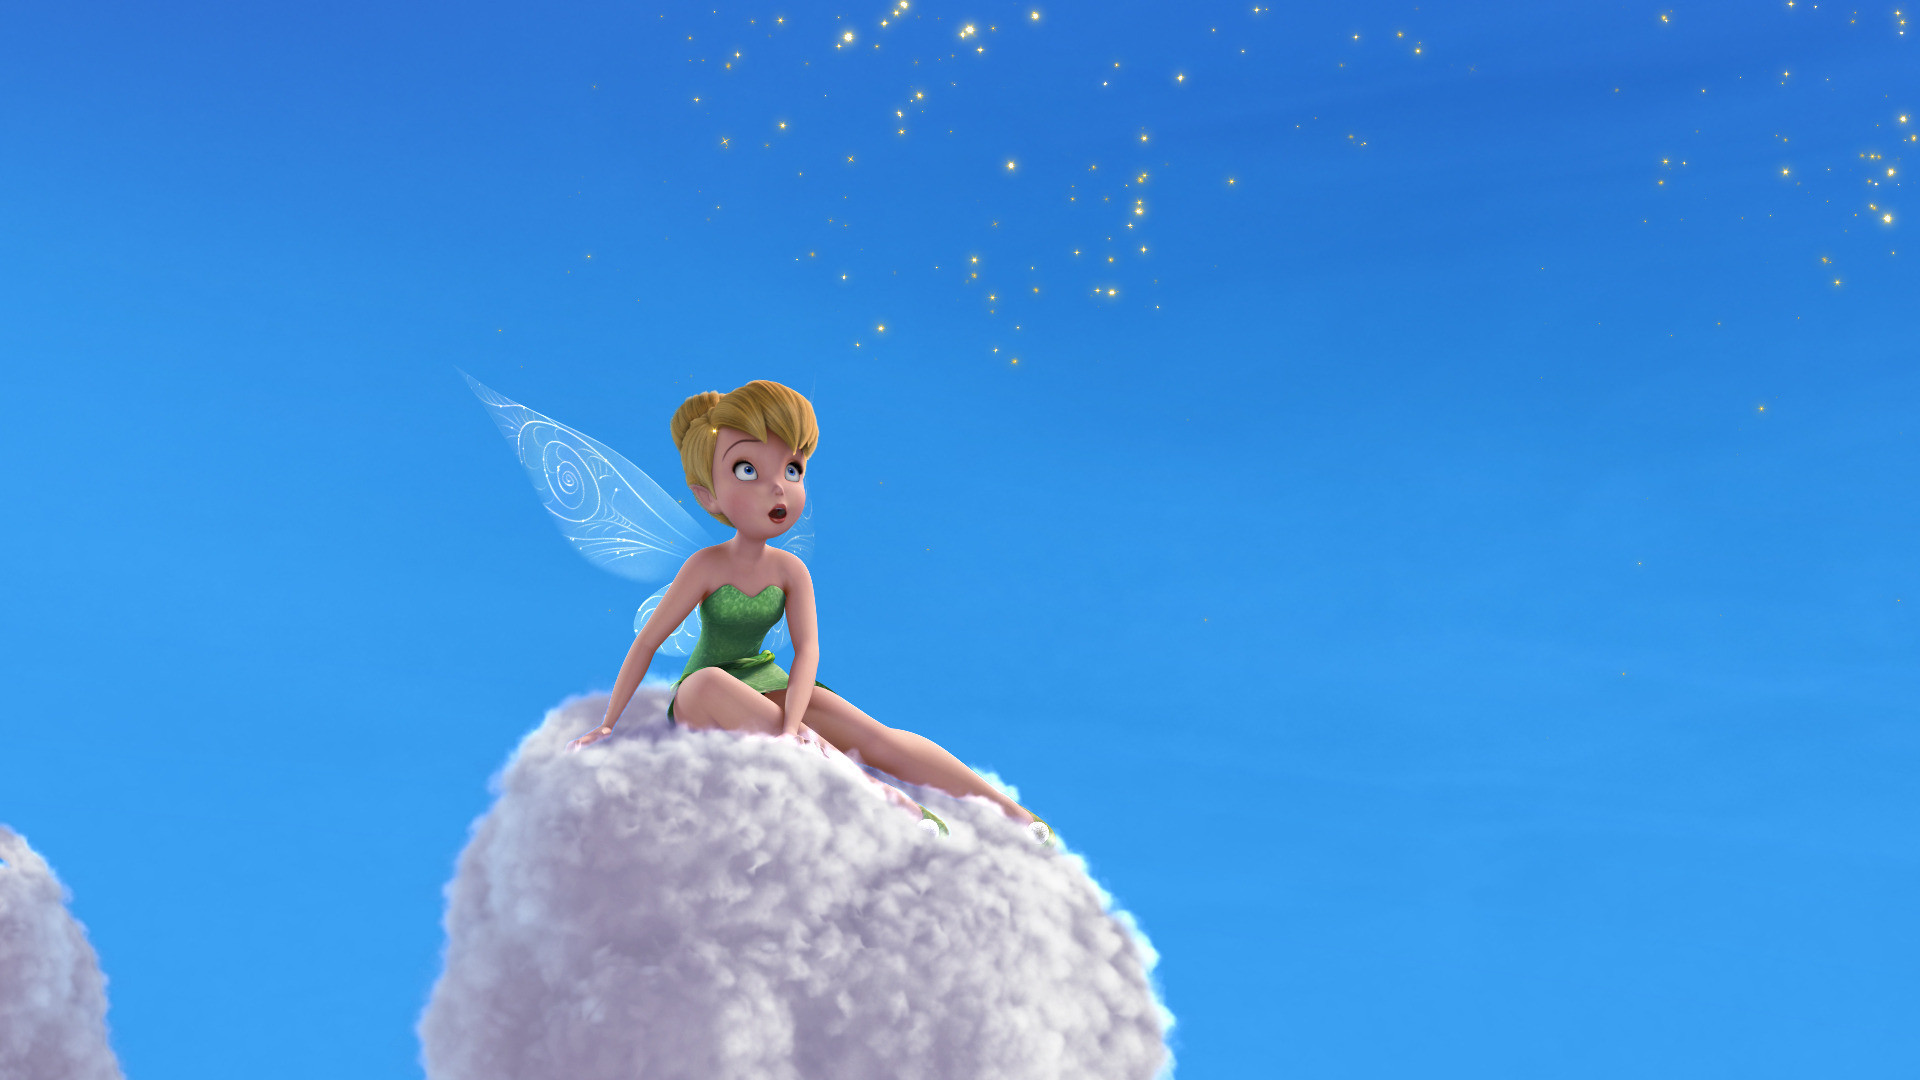 High Resolution Awesome Tinkerbell Background Wallpaper Full Size ...